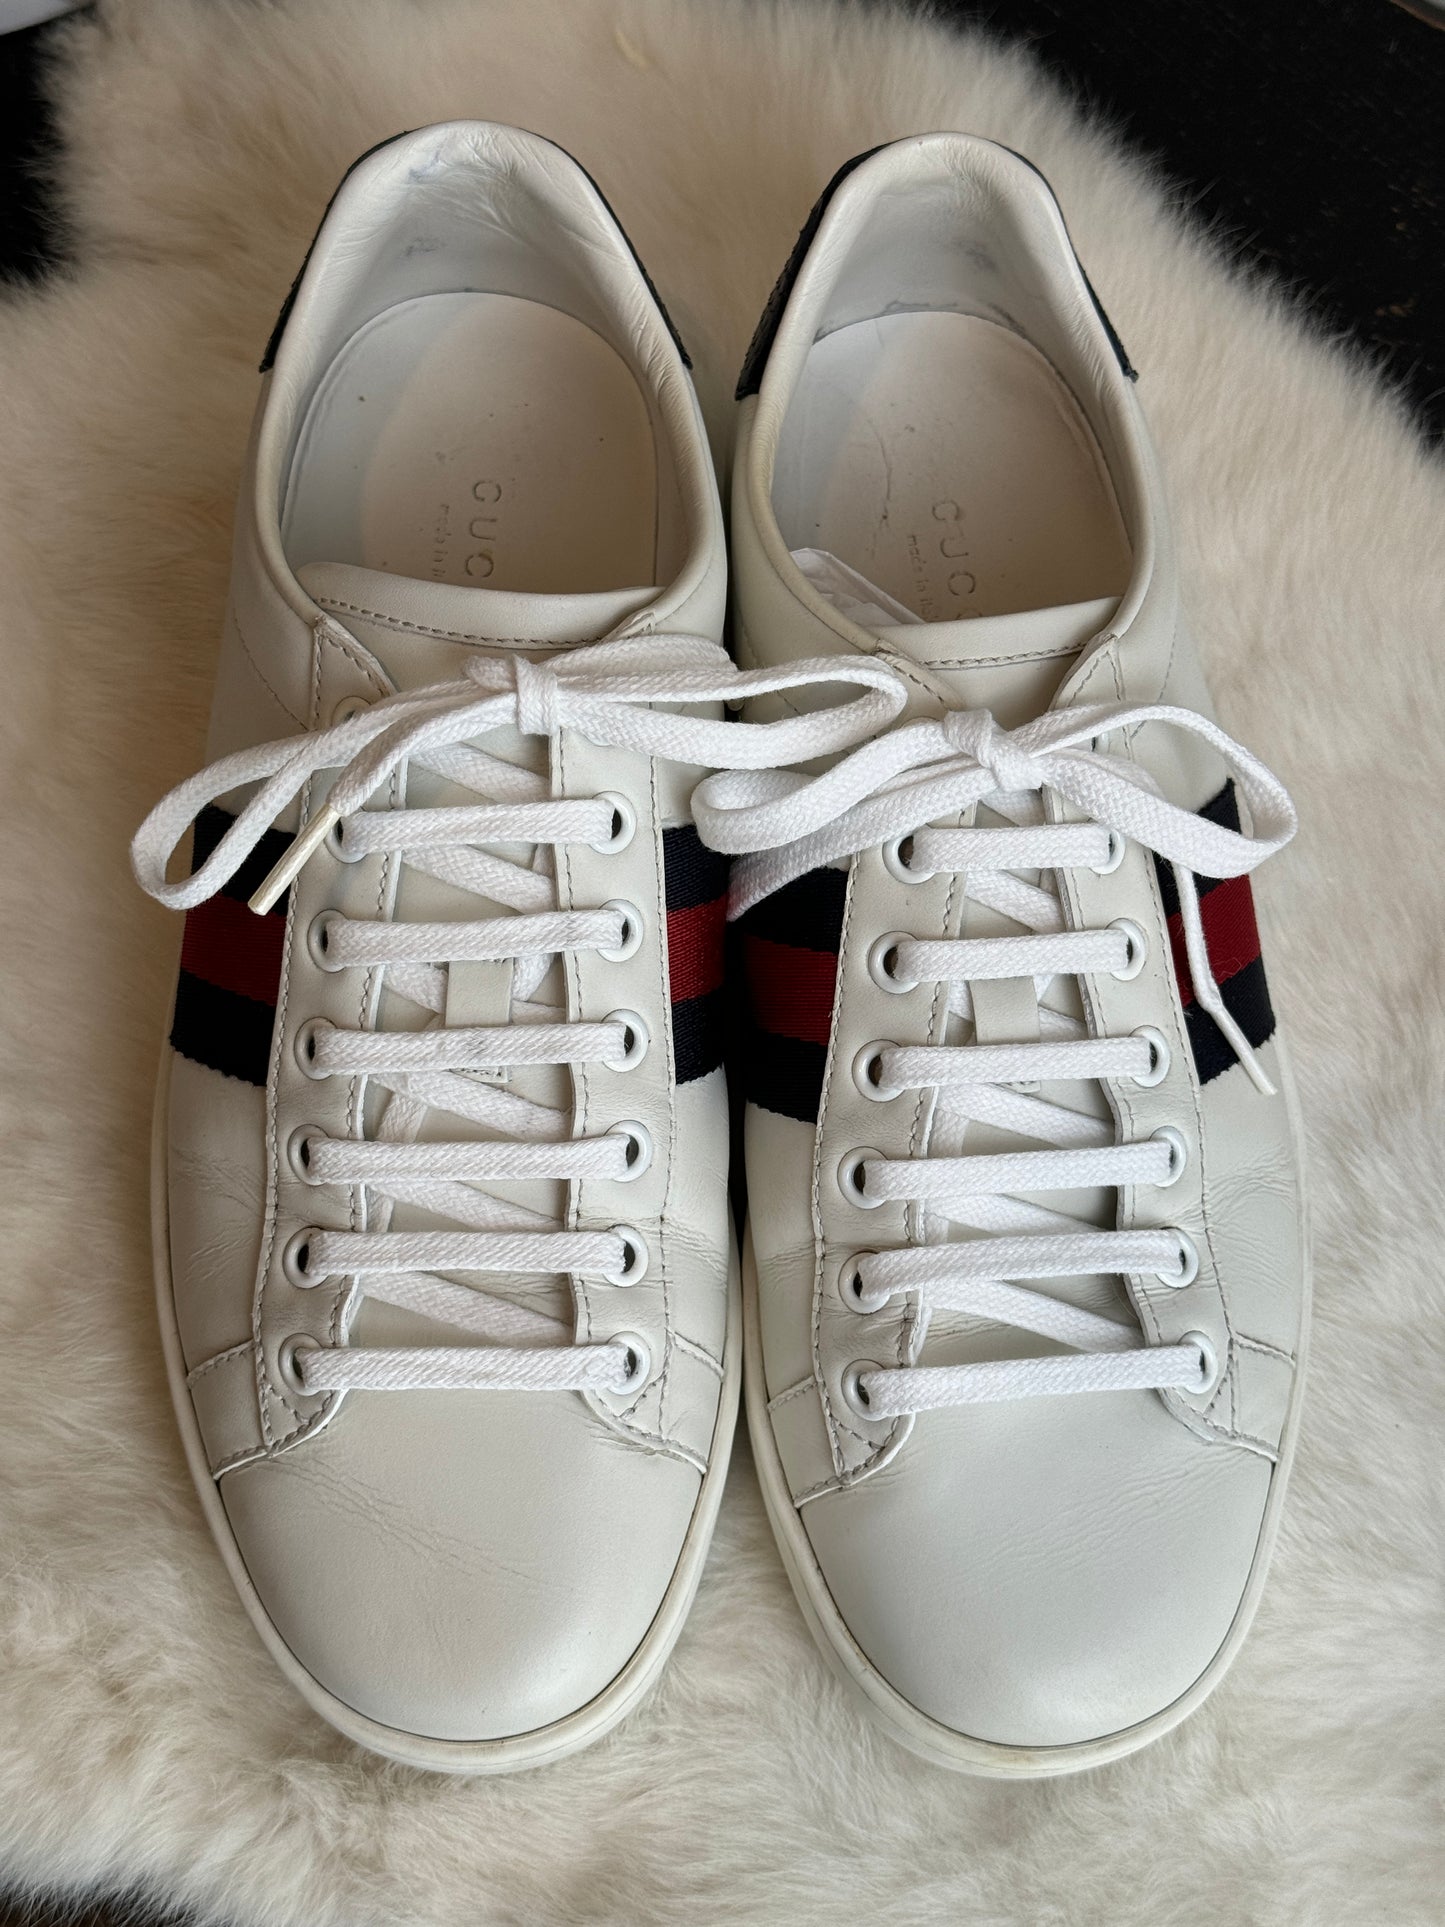 Gucci Ace Navy/Red Web Sneakers 37EU